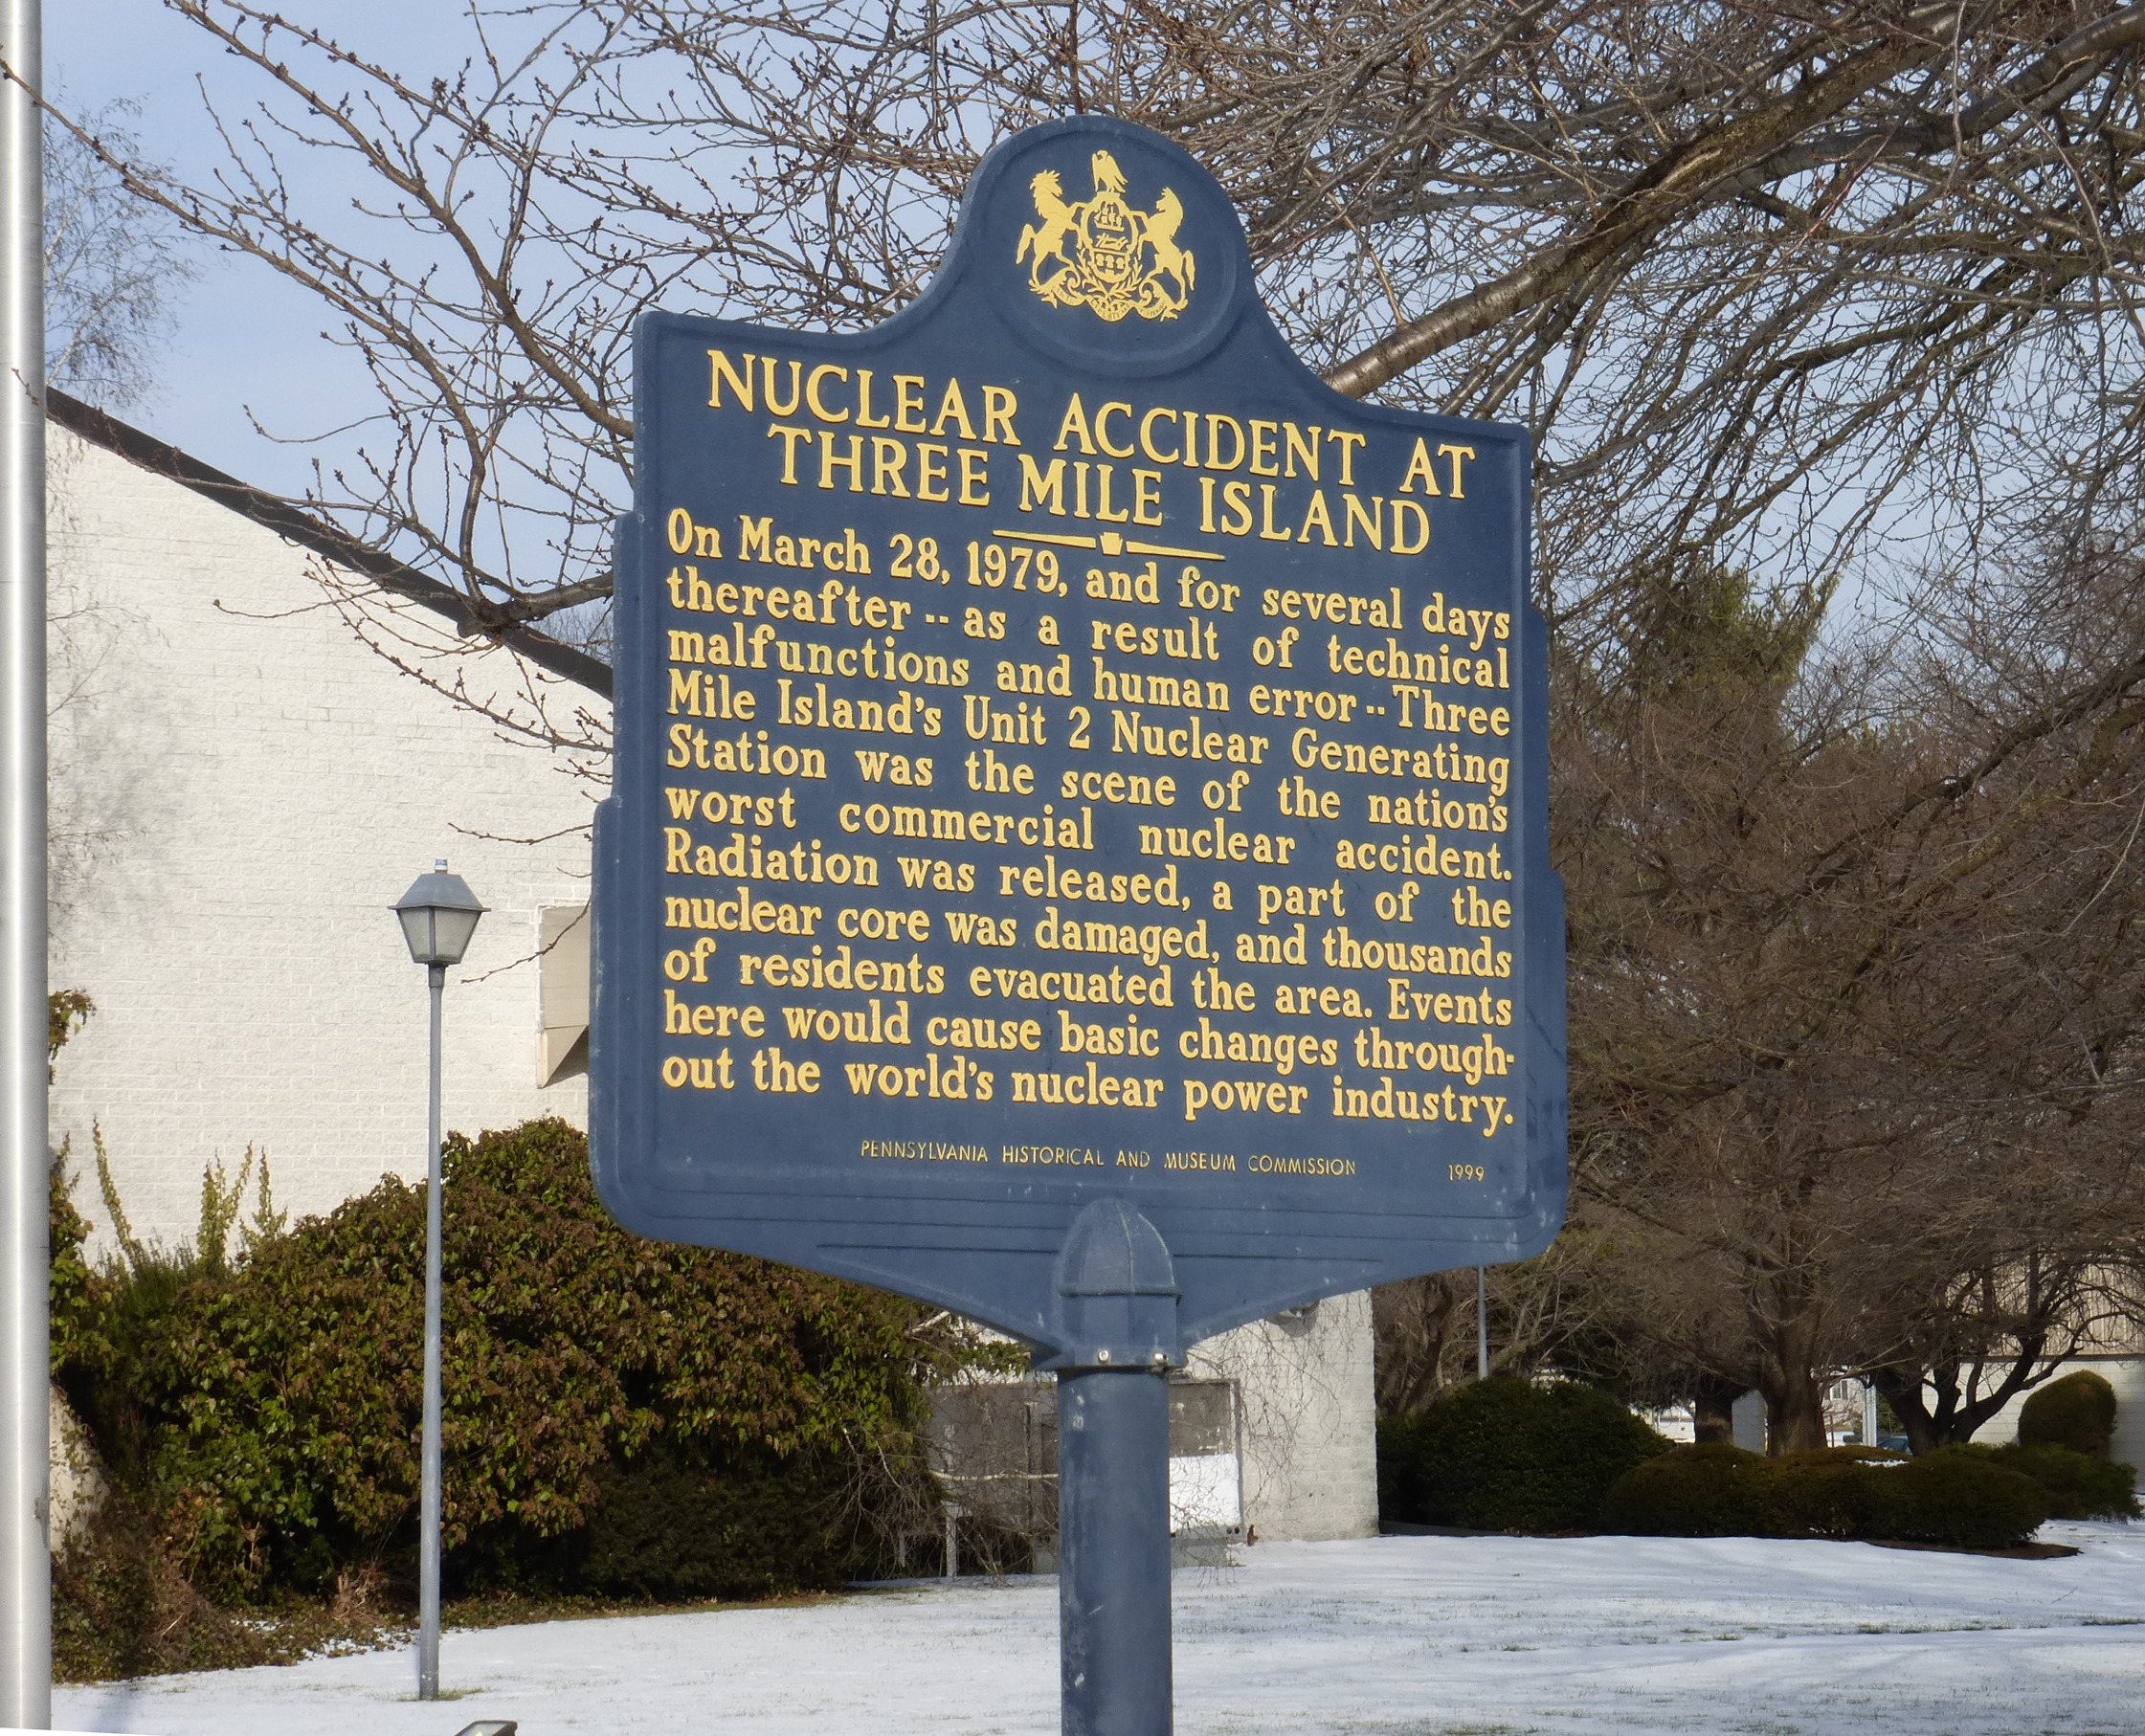 Sign about the nuclear accident at Three Mile Island.